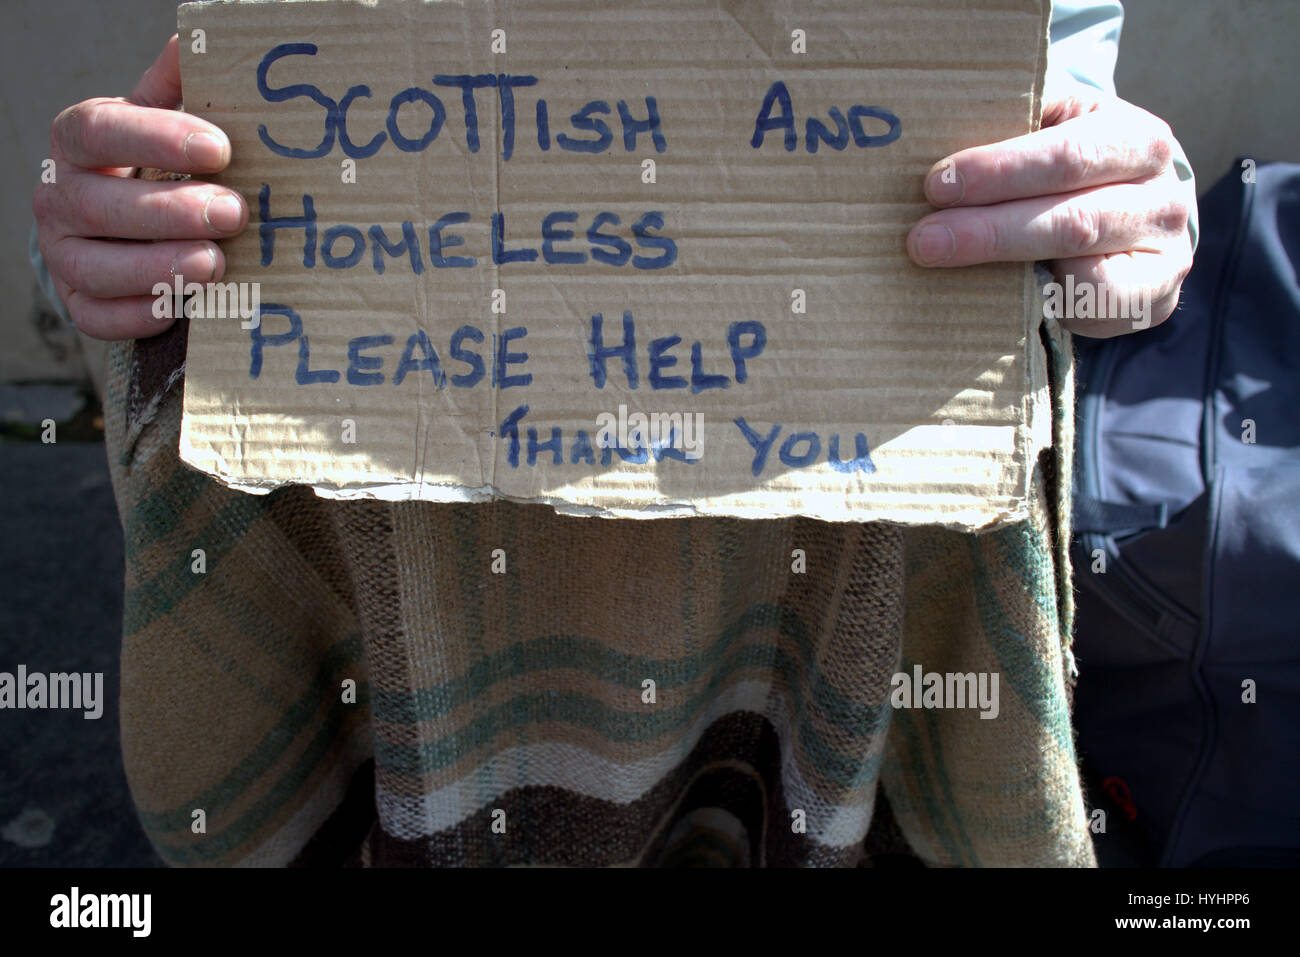 homeless in the uk begging on the street Scottish and homeless please help Stock Photo